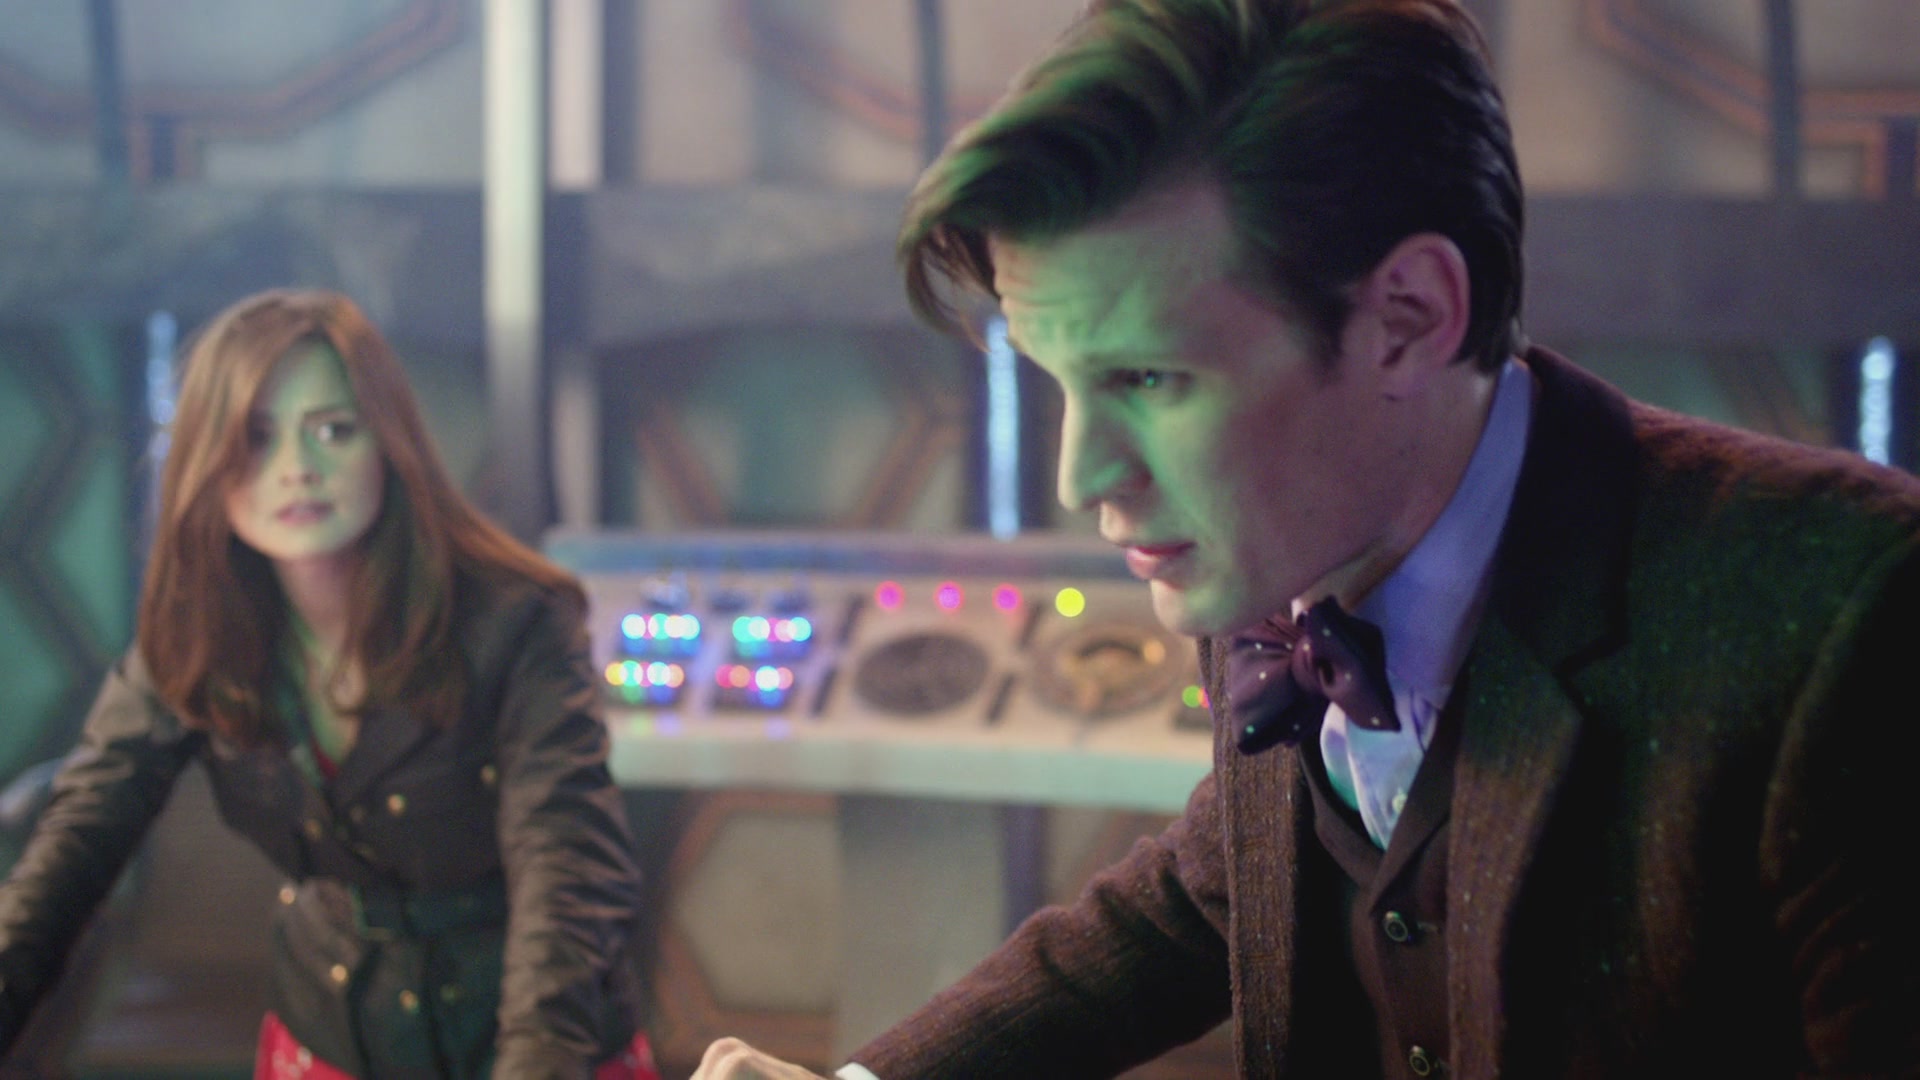 DayOfTheDoctor-Caps-0931.jpg